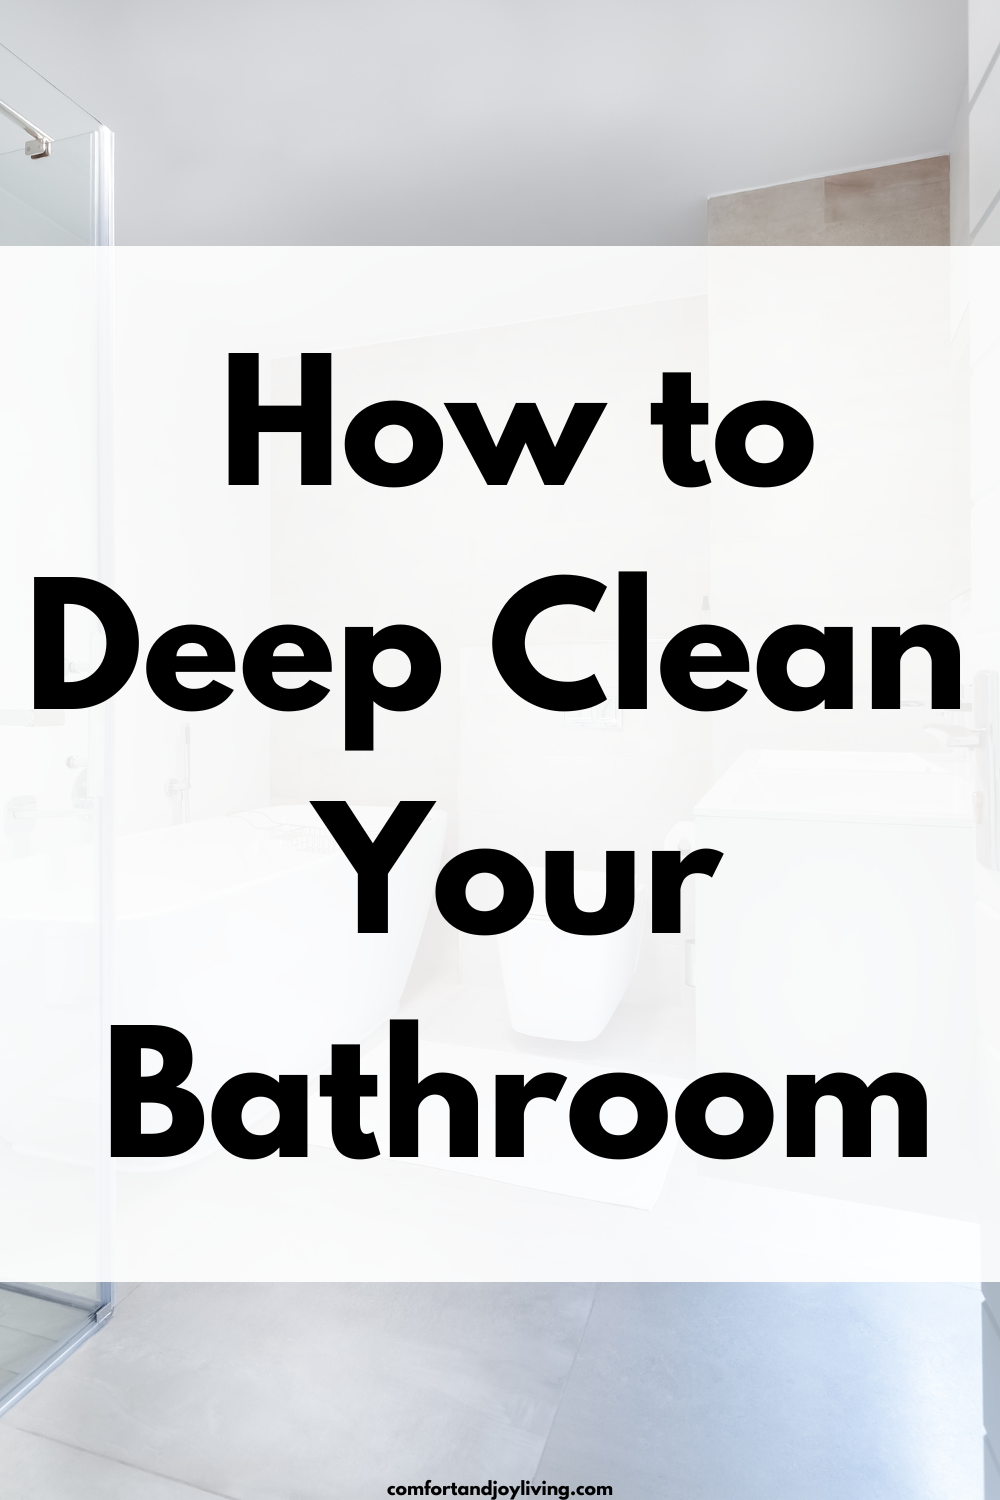 How to Deep Clean Your Bathroom